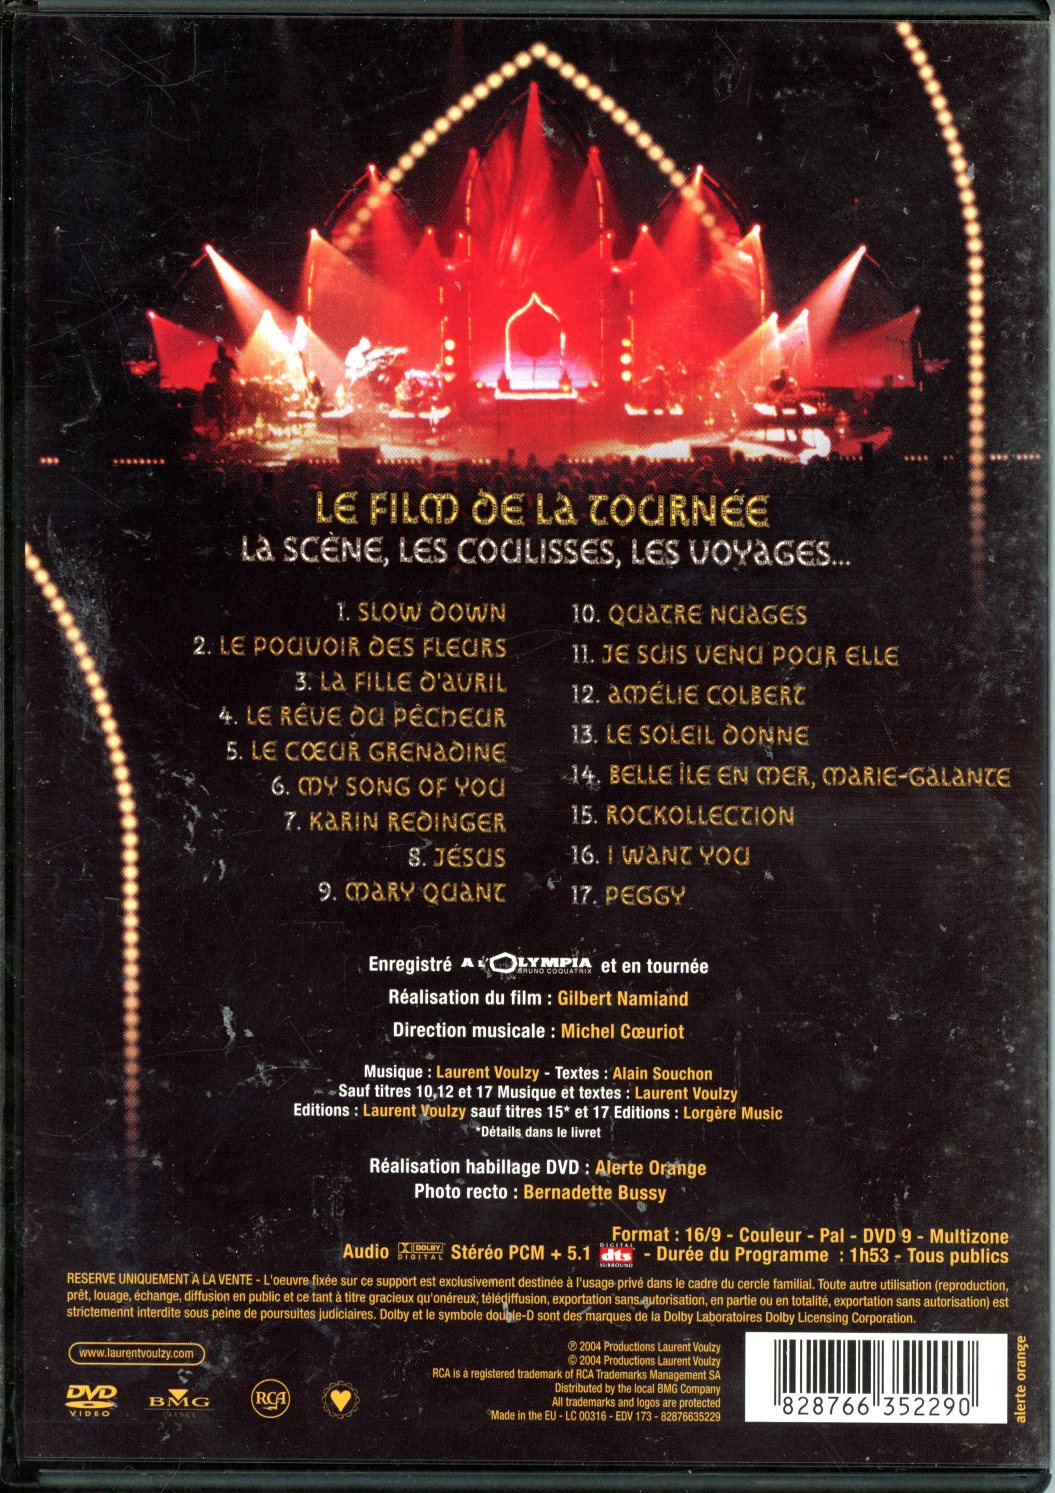 724349043190 DVD OCCASION LAURENT VOULZY